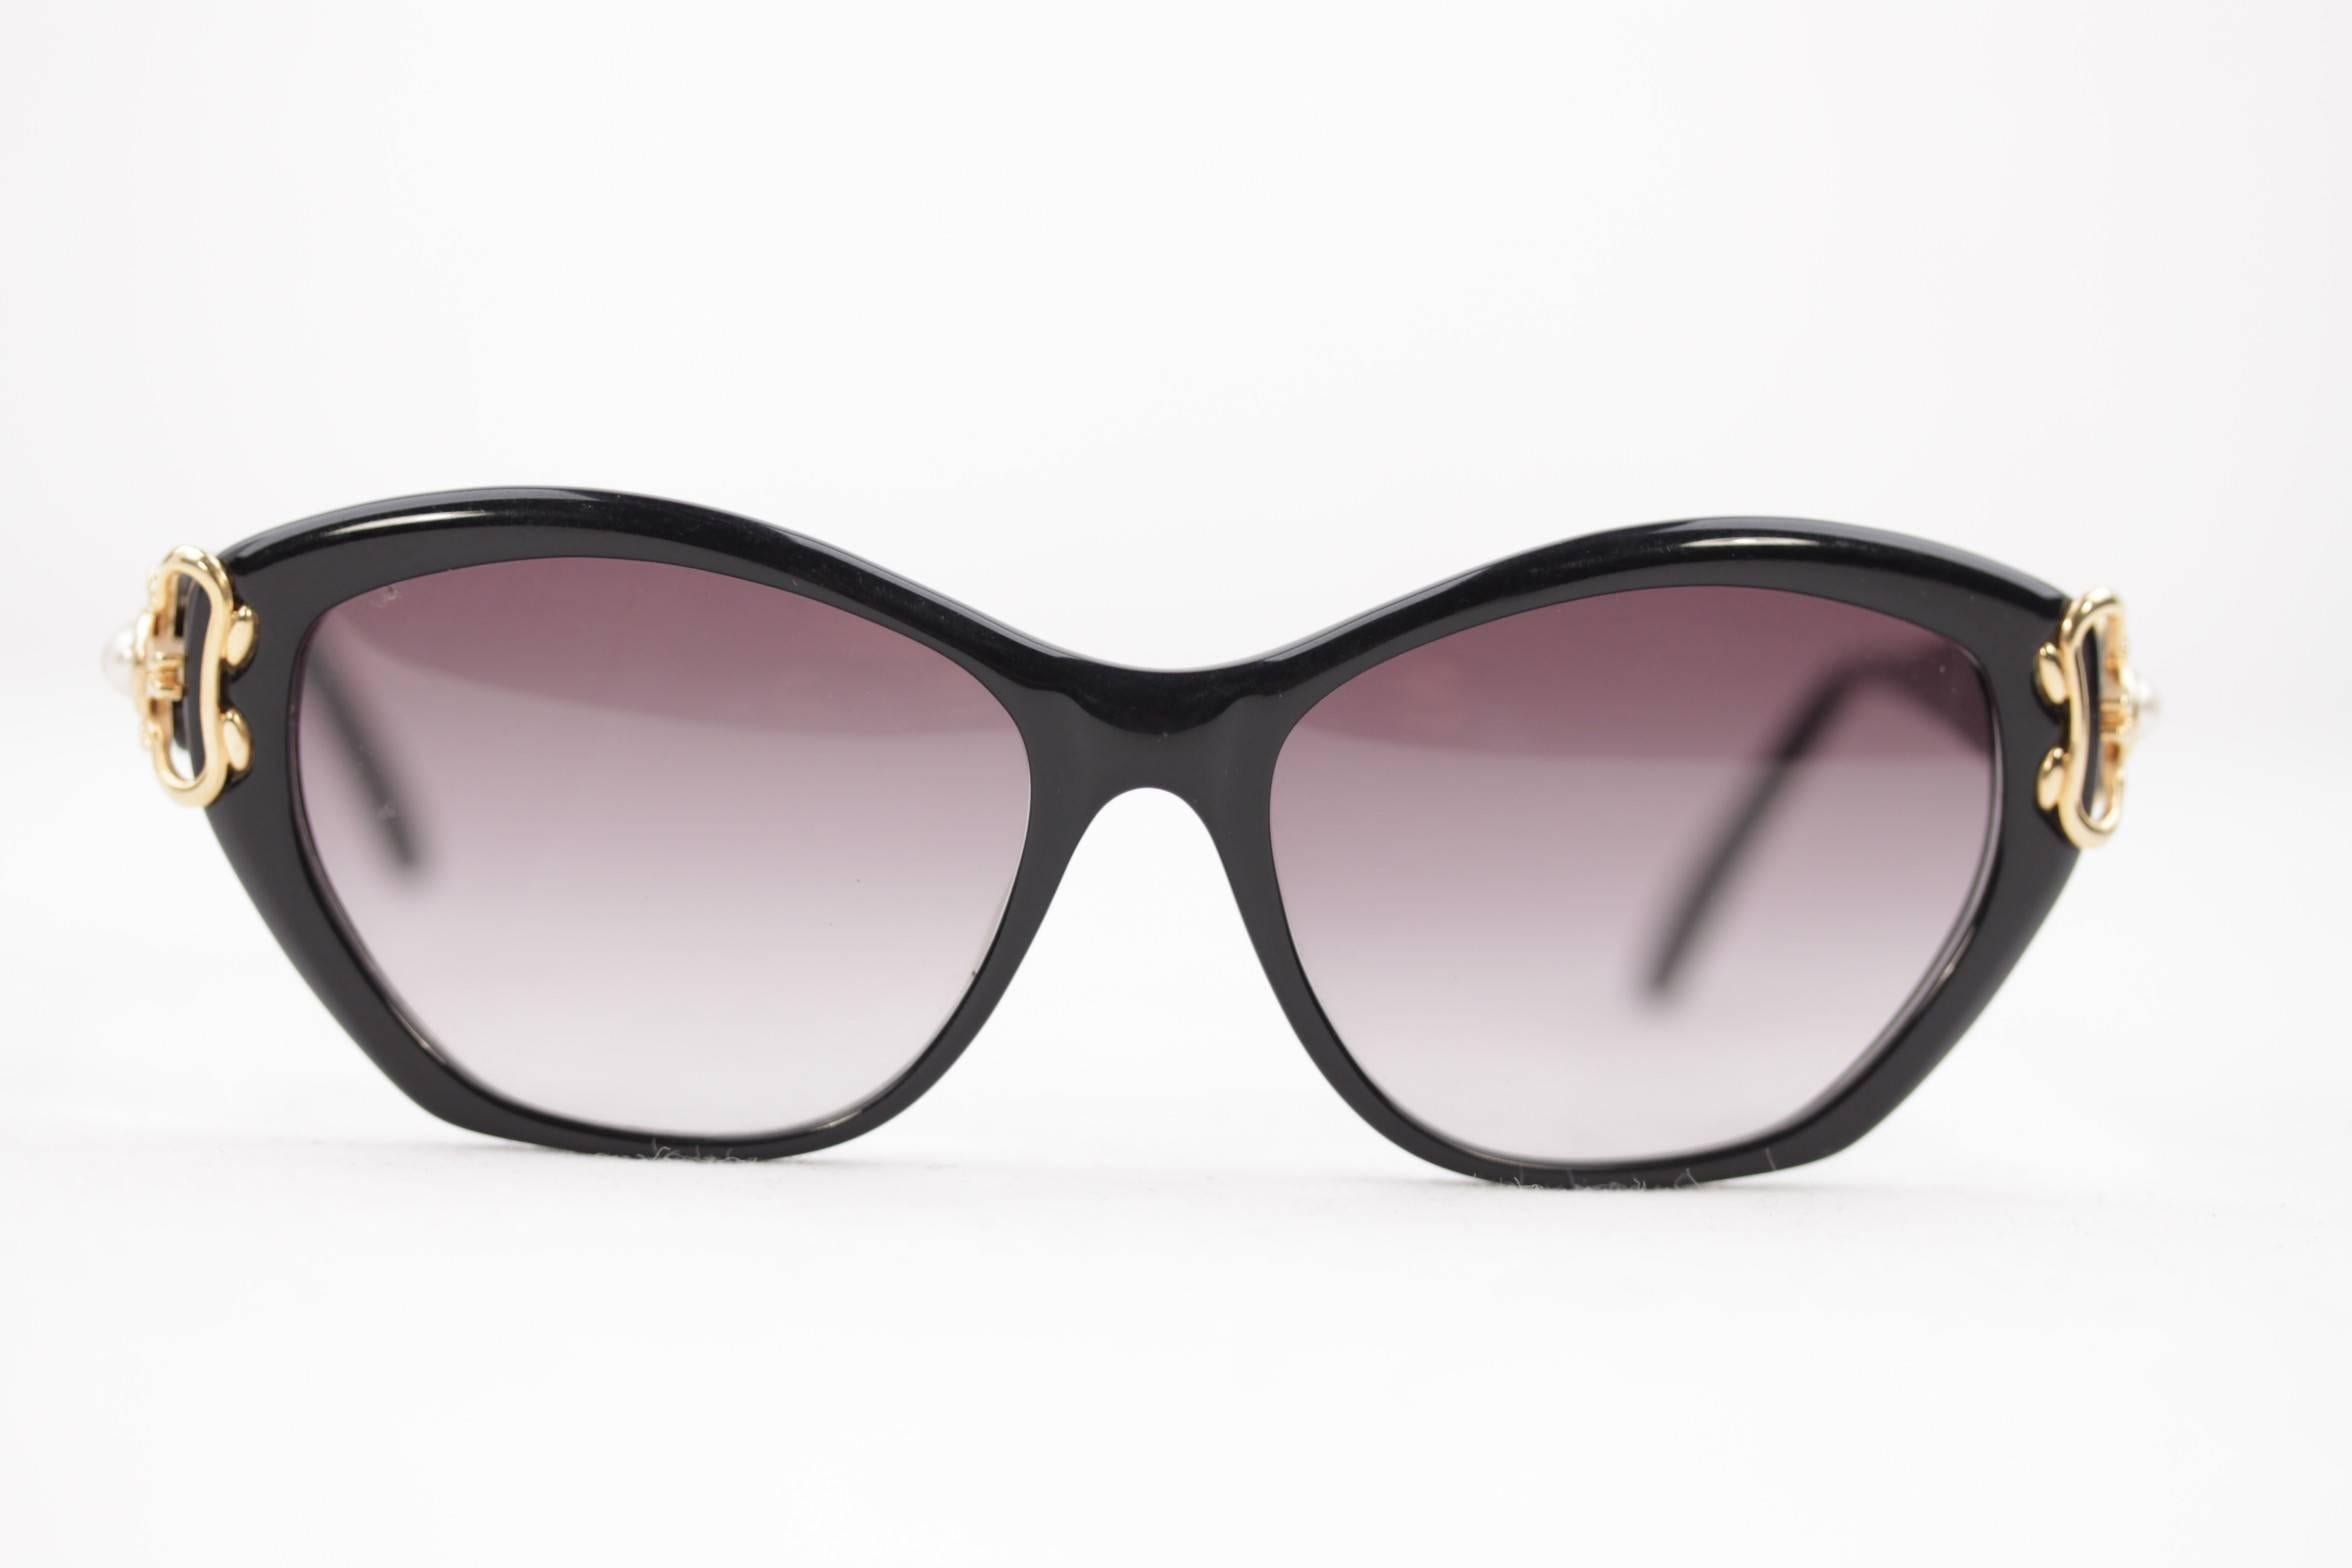 - Black Plastic frame

- Cat eye design

- Temples are adorned with gold metal and faux pearl detail

- Frame made in Italy

- Gradient Gray Lens

- Style/Model: RC 782 - Col. 319

Condition: MINT!

Measurements (in mm's):

 

- TEMPLE MAx. LENGTH: